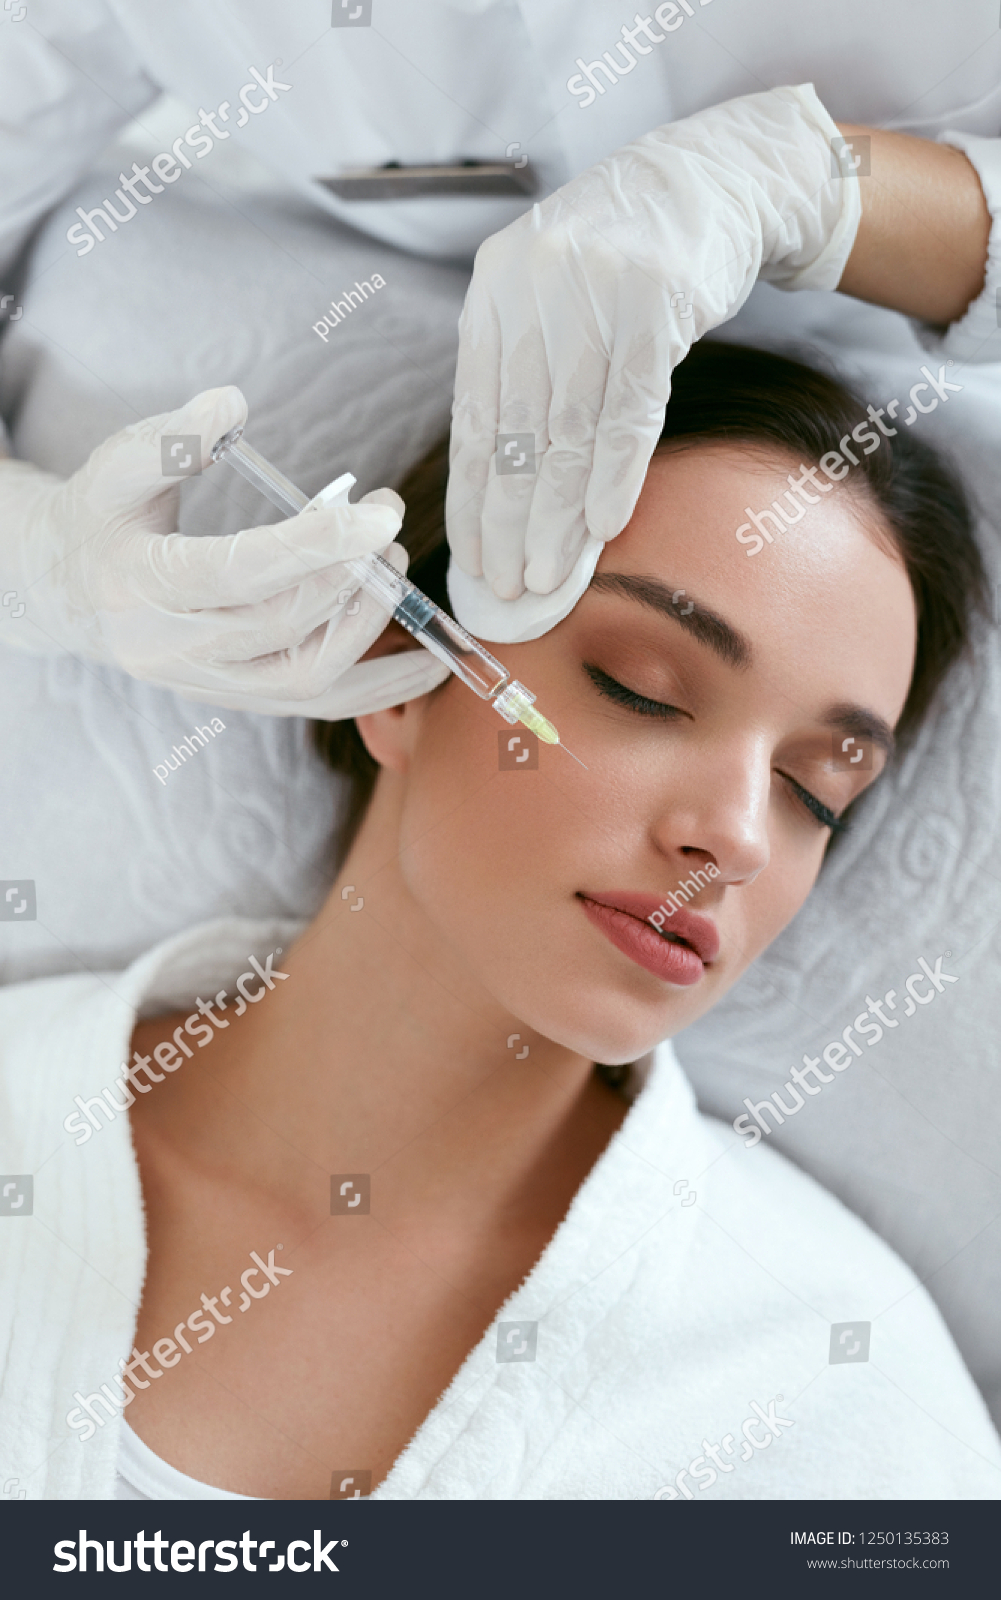 Beauty Injections. Woman Getting Face Lifting Procedure Closeup #1250135383